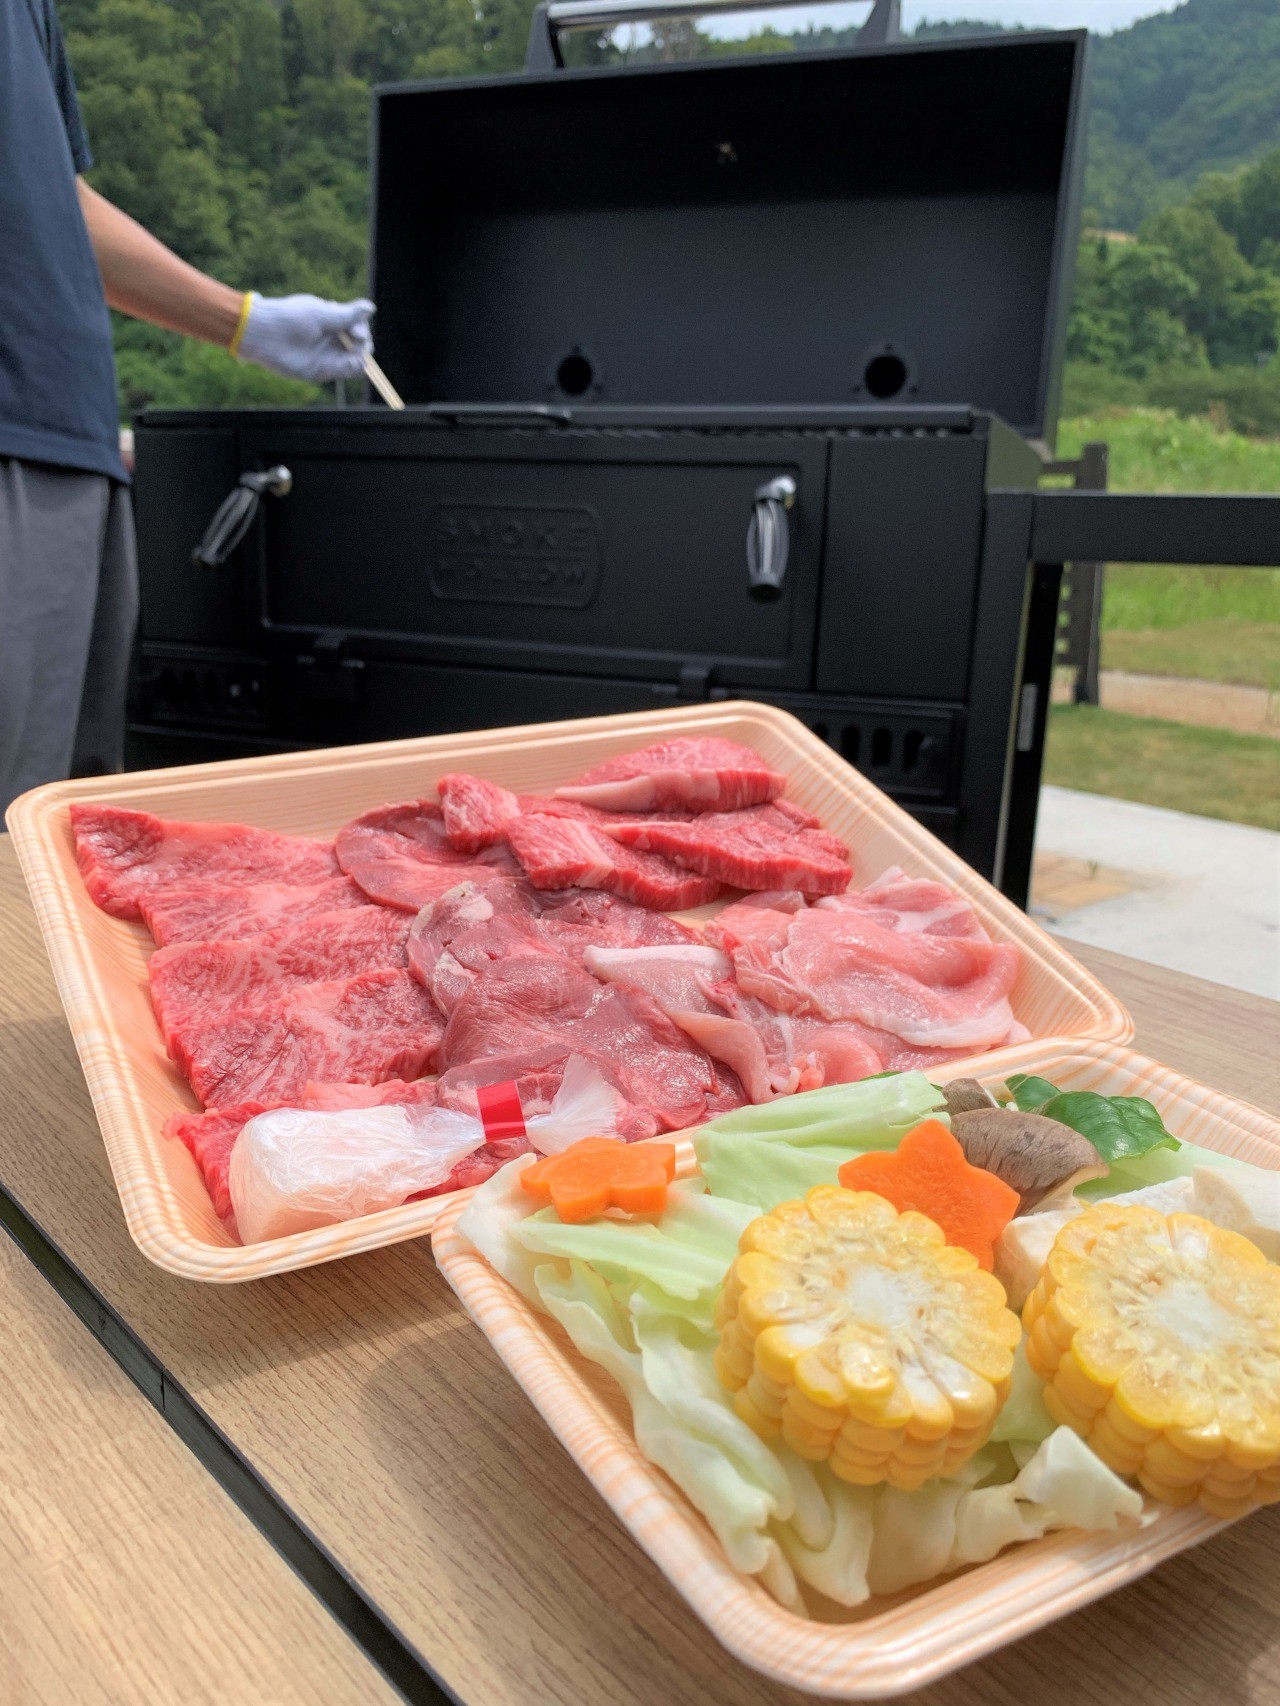 Ishibuchi Valley Barbecue Experience - Glamping BBQ with Yonezawa beef grill, tarp, and campfire